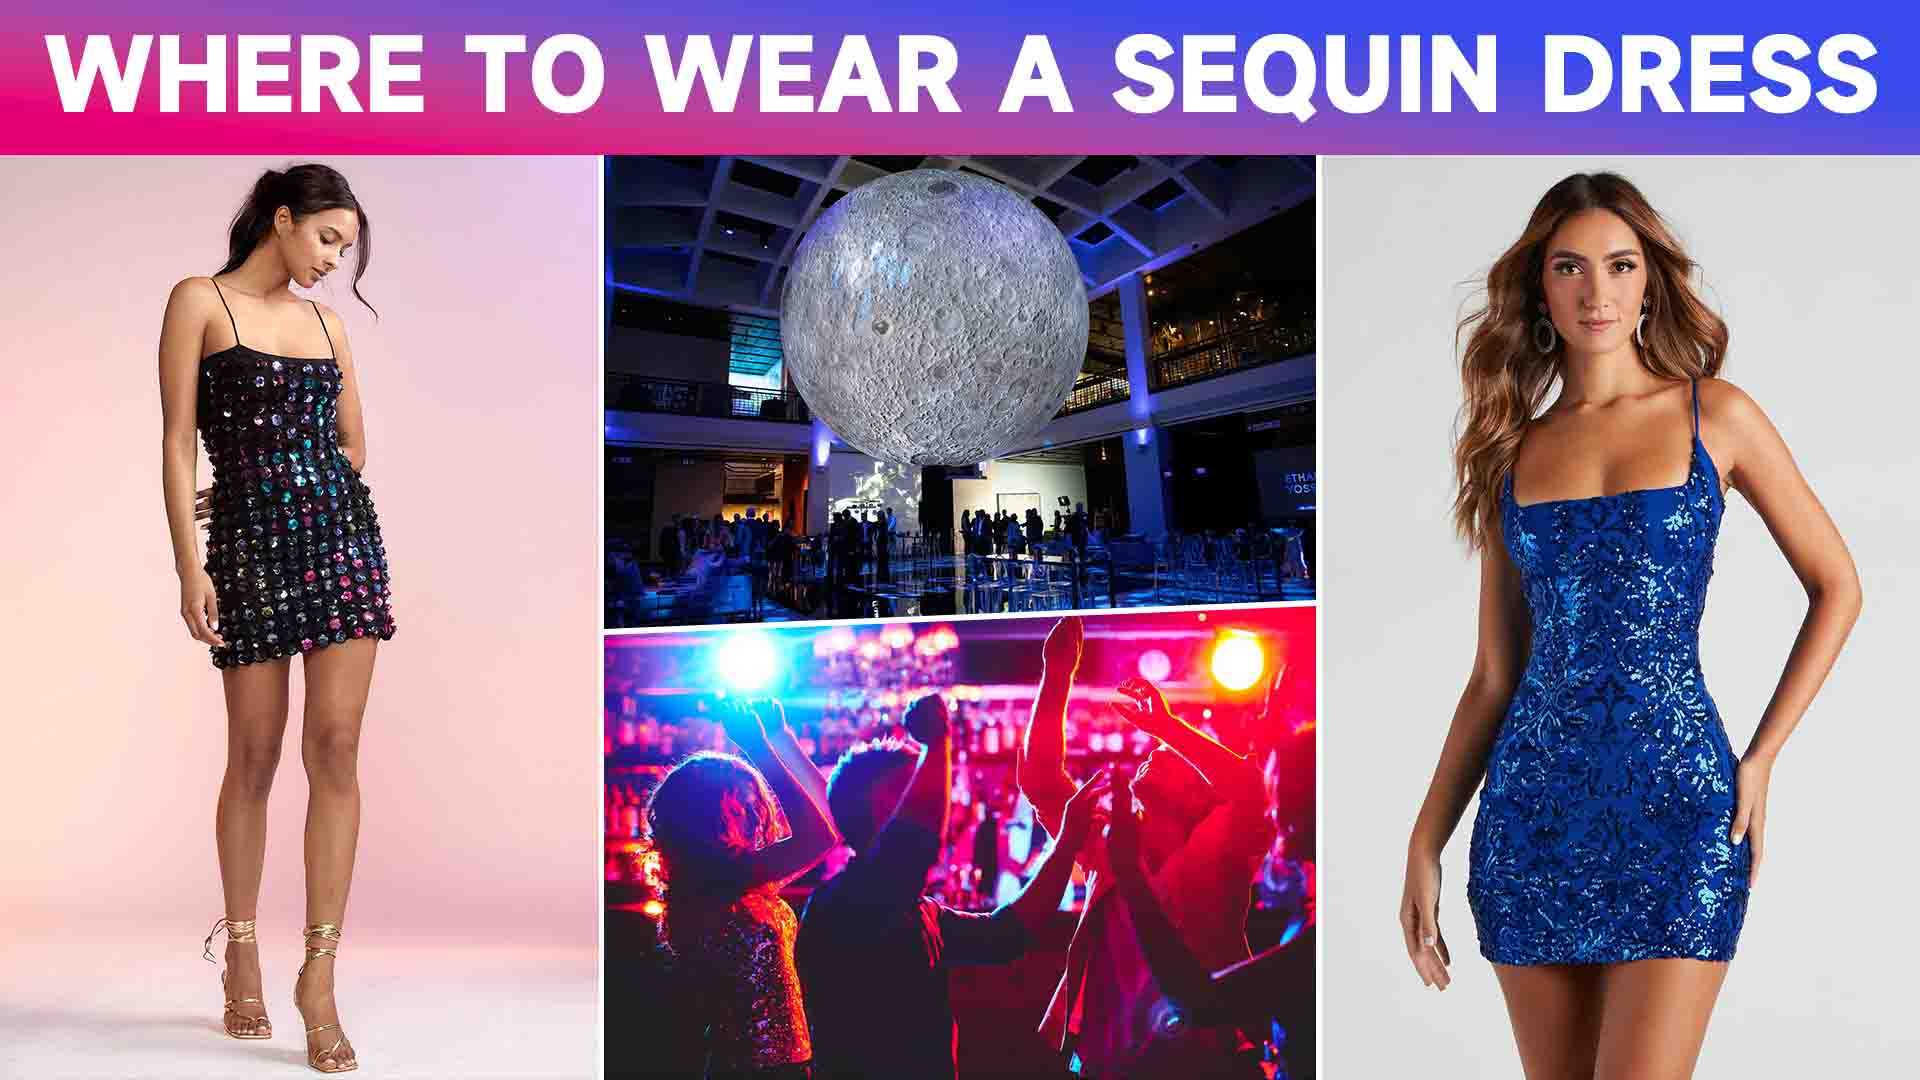 Where to Wear a Sequin Dress